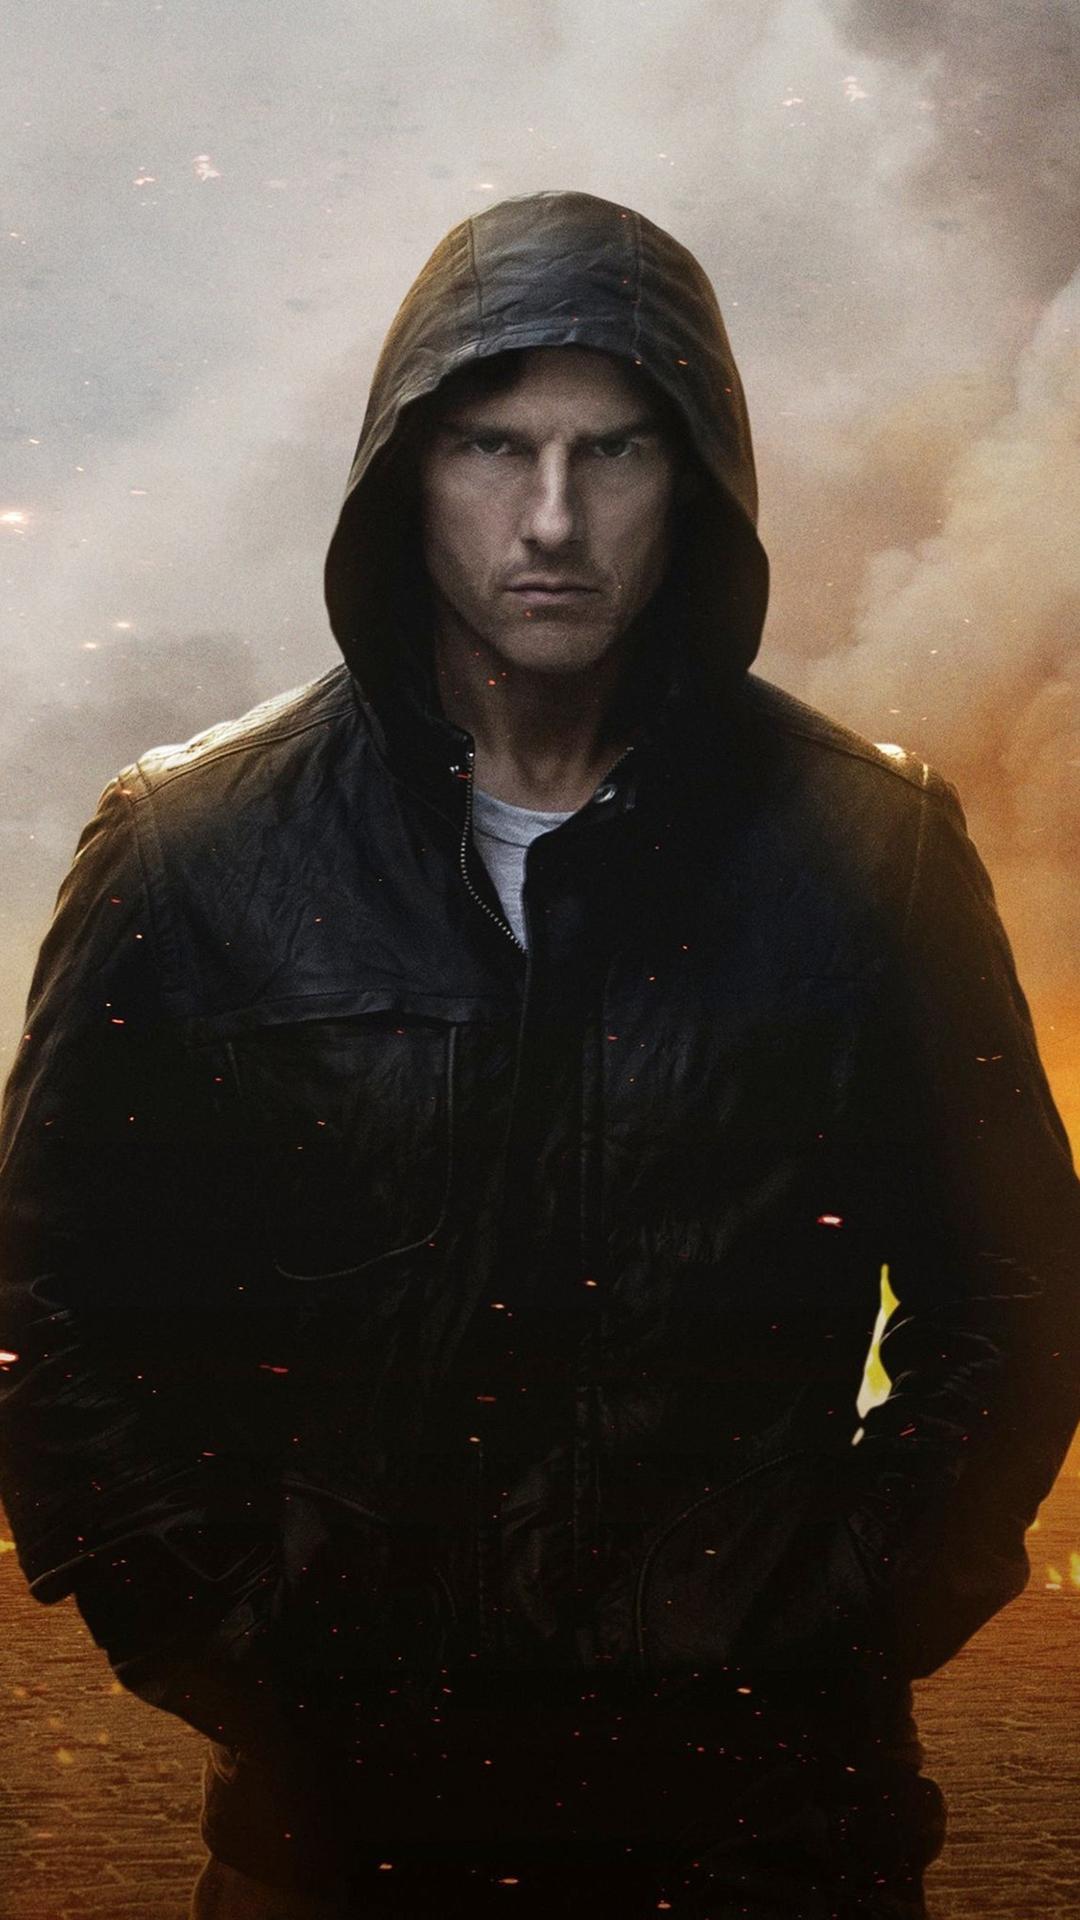 Tom Cruise htc one wallpaper htc one wallpaper